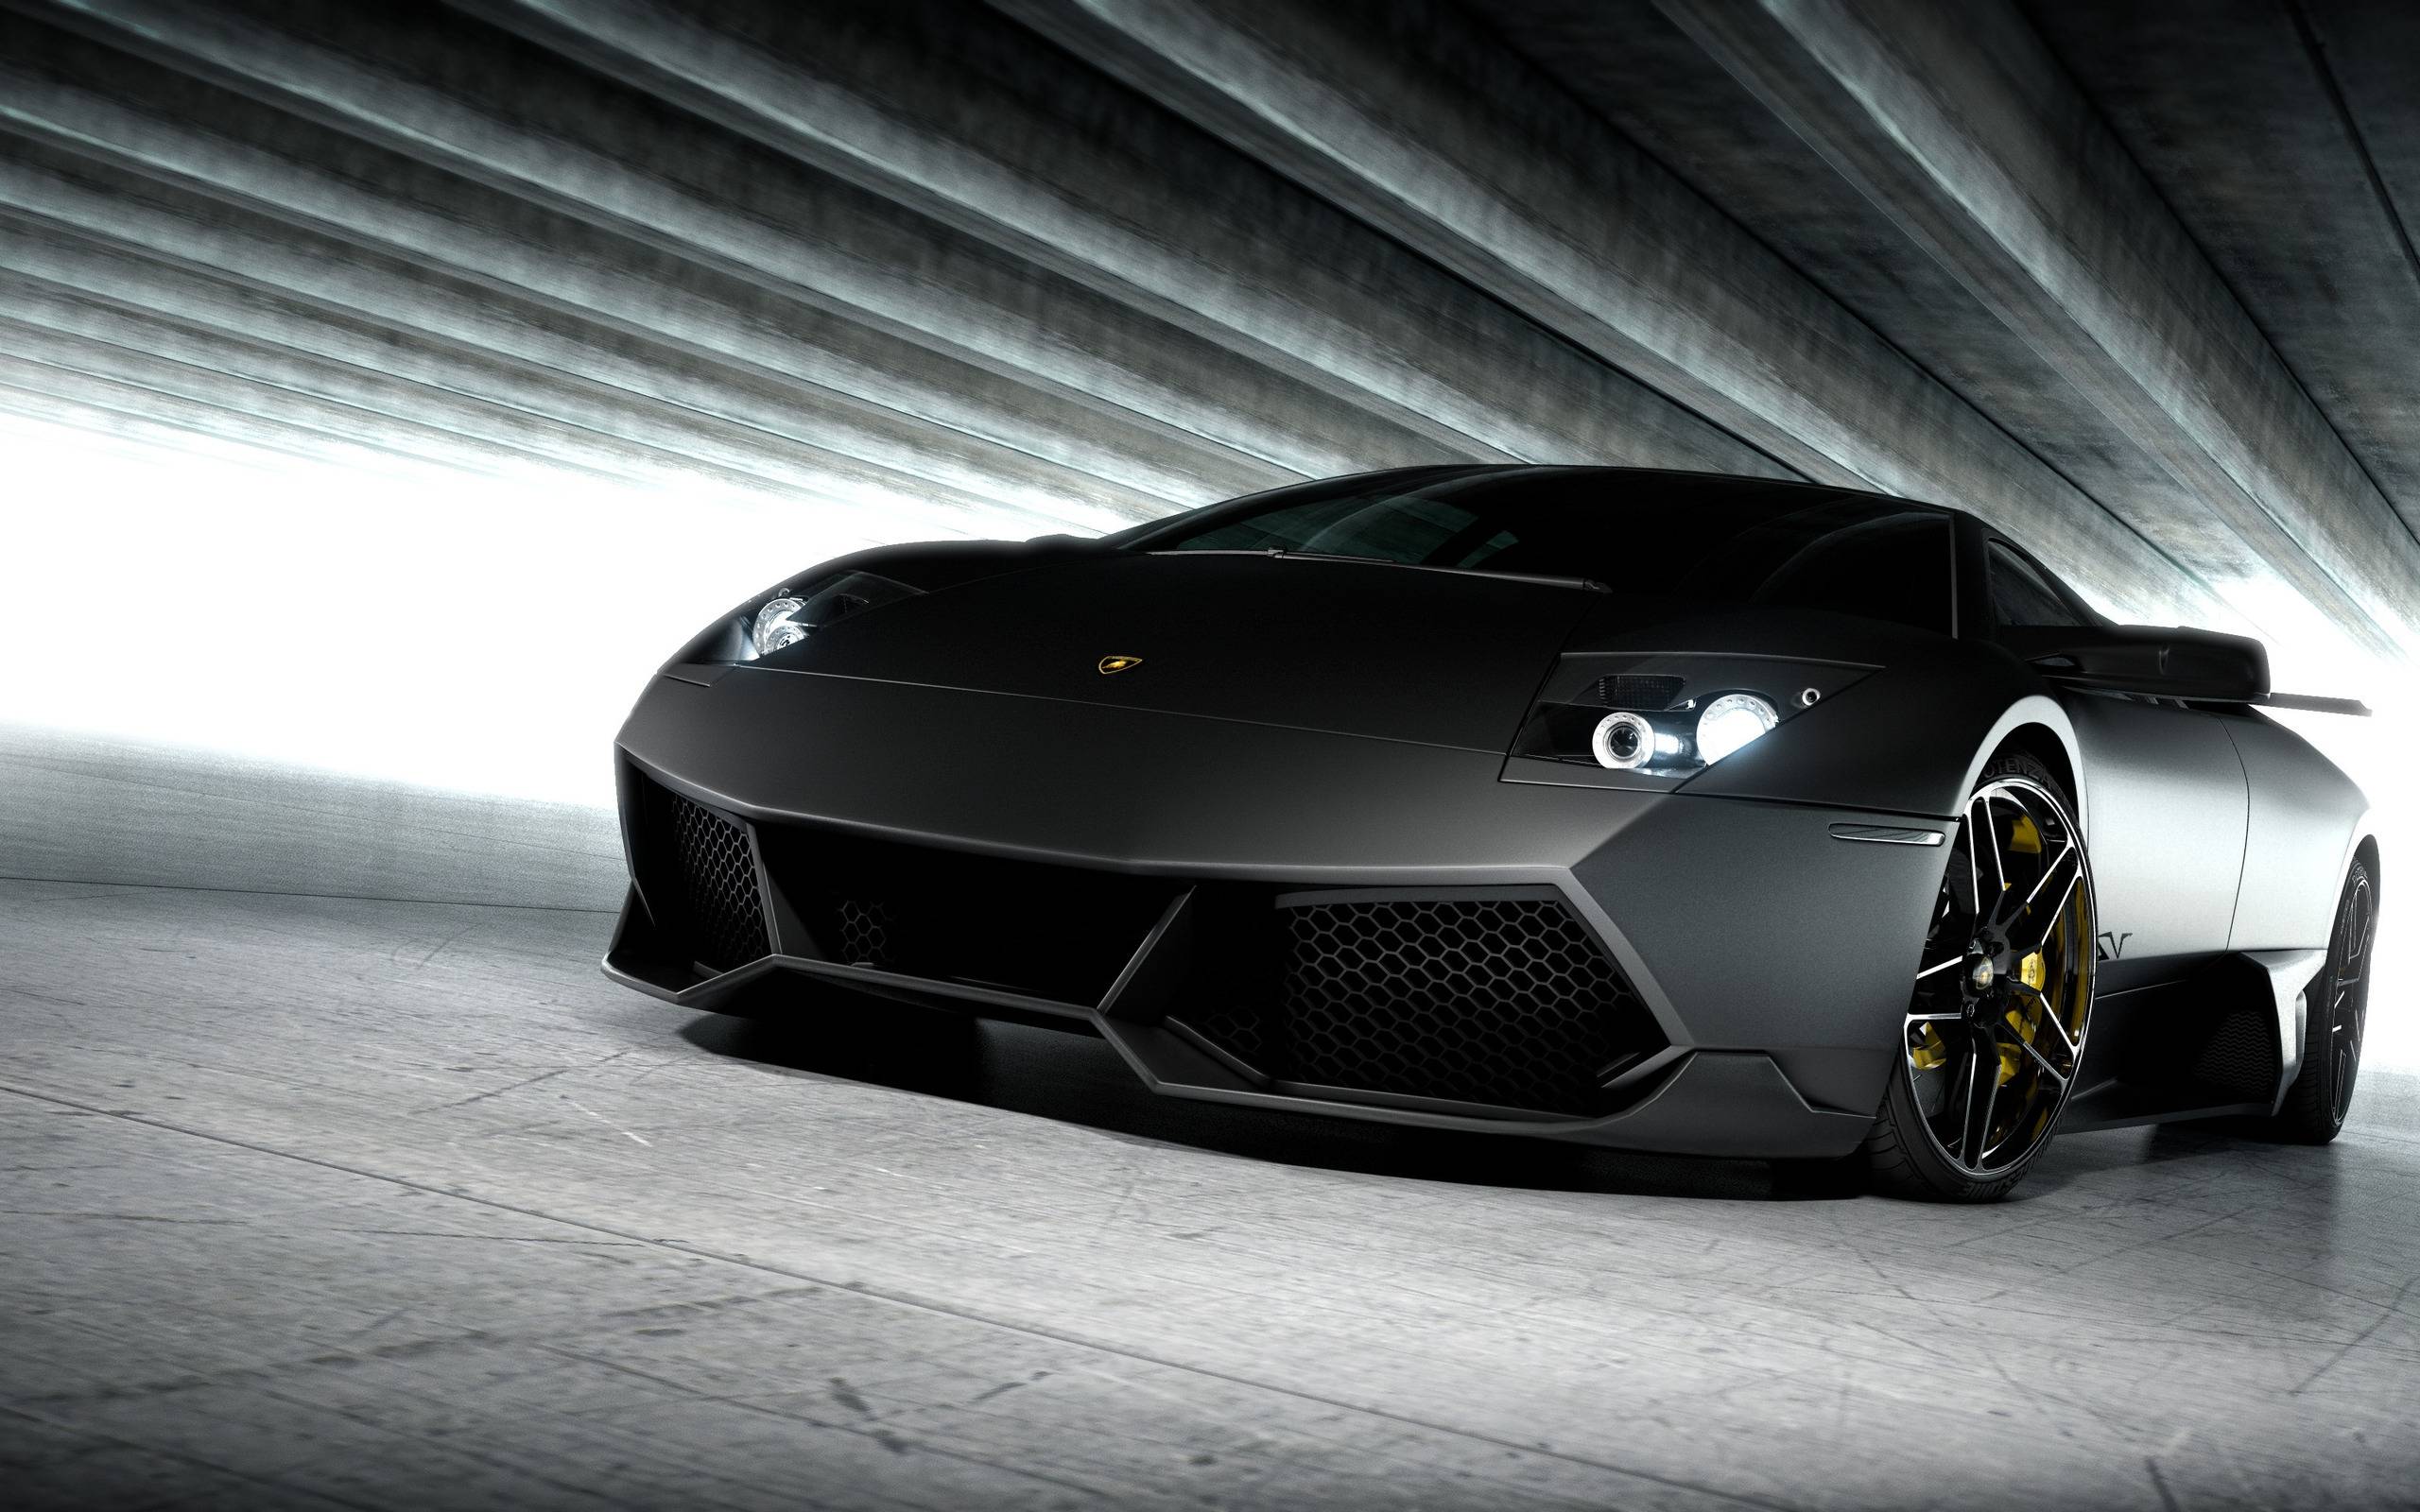 Wallpapers Fast Cars - Wallpaper Cave